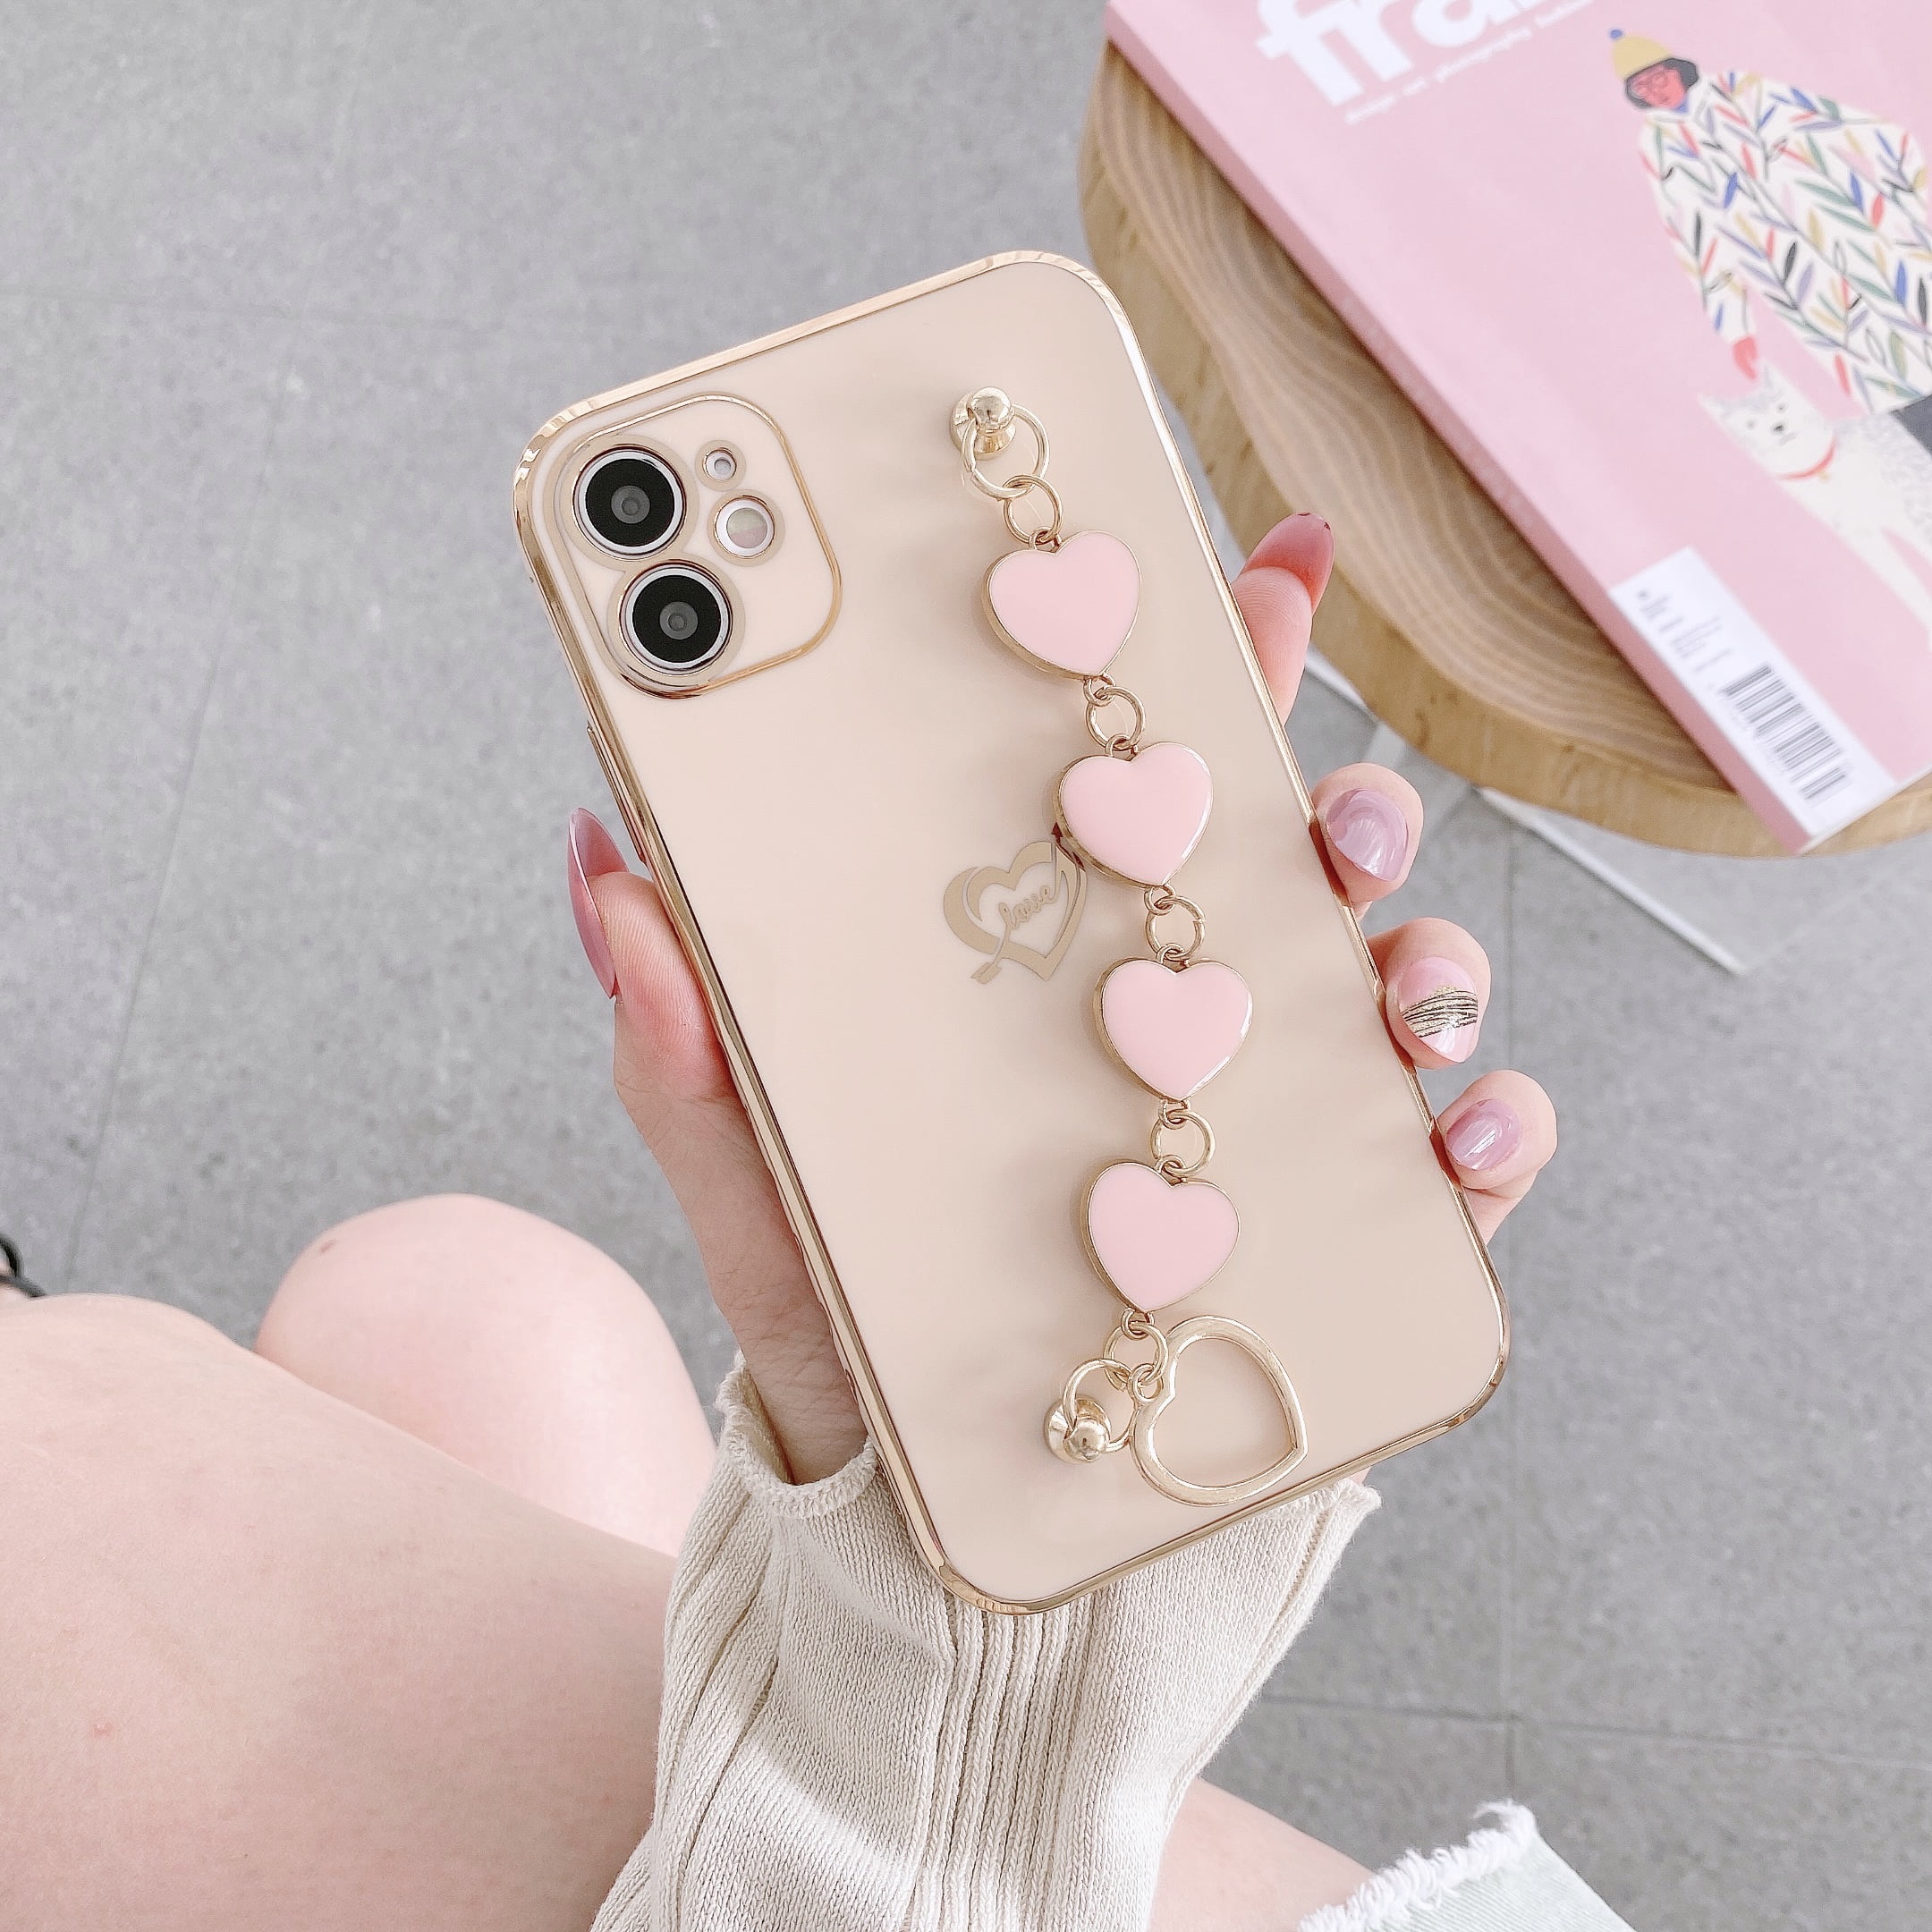 Designer Square Case Compatible with iPhone 11 Pro Max for Women, Luxury  Aesthetic Classic Pattern Leather Back Cover Soft Frame Metal nameplate  Cute Shiny Trunk iPhone 11 Promax - Khaki 